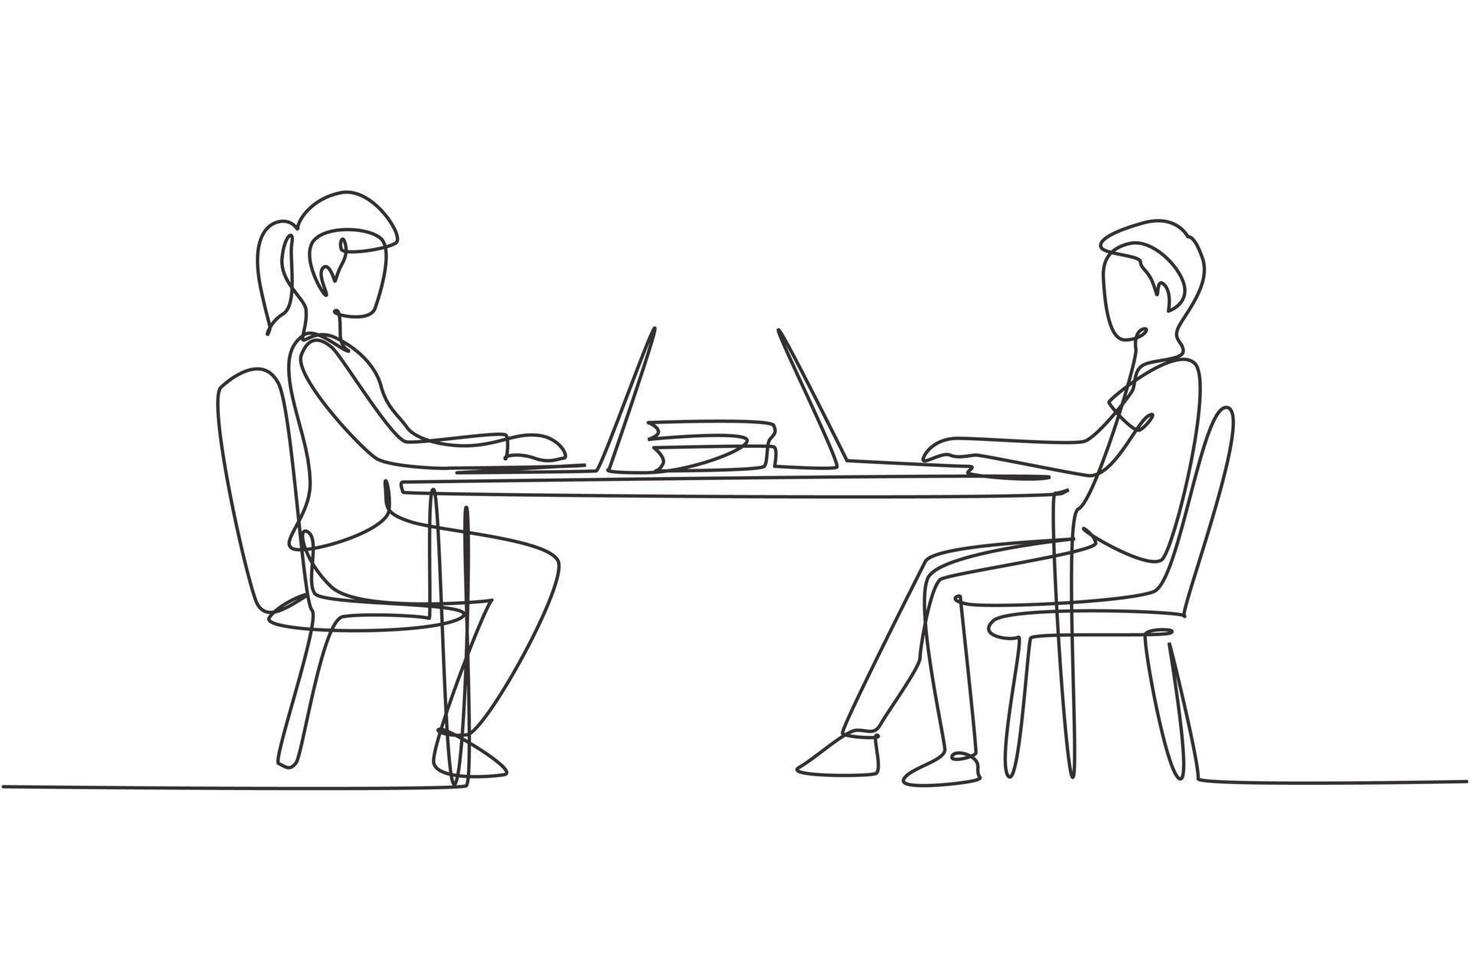 Single continuous line drawing boy and girl students studying with laptop and sitting on chairs around desk. Back to school, online education concept. One line draw graphic design vector illustration